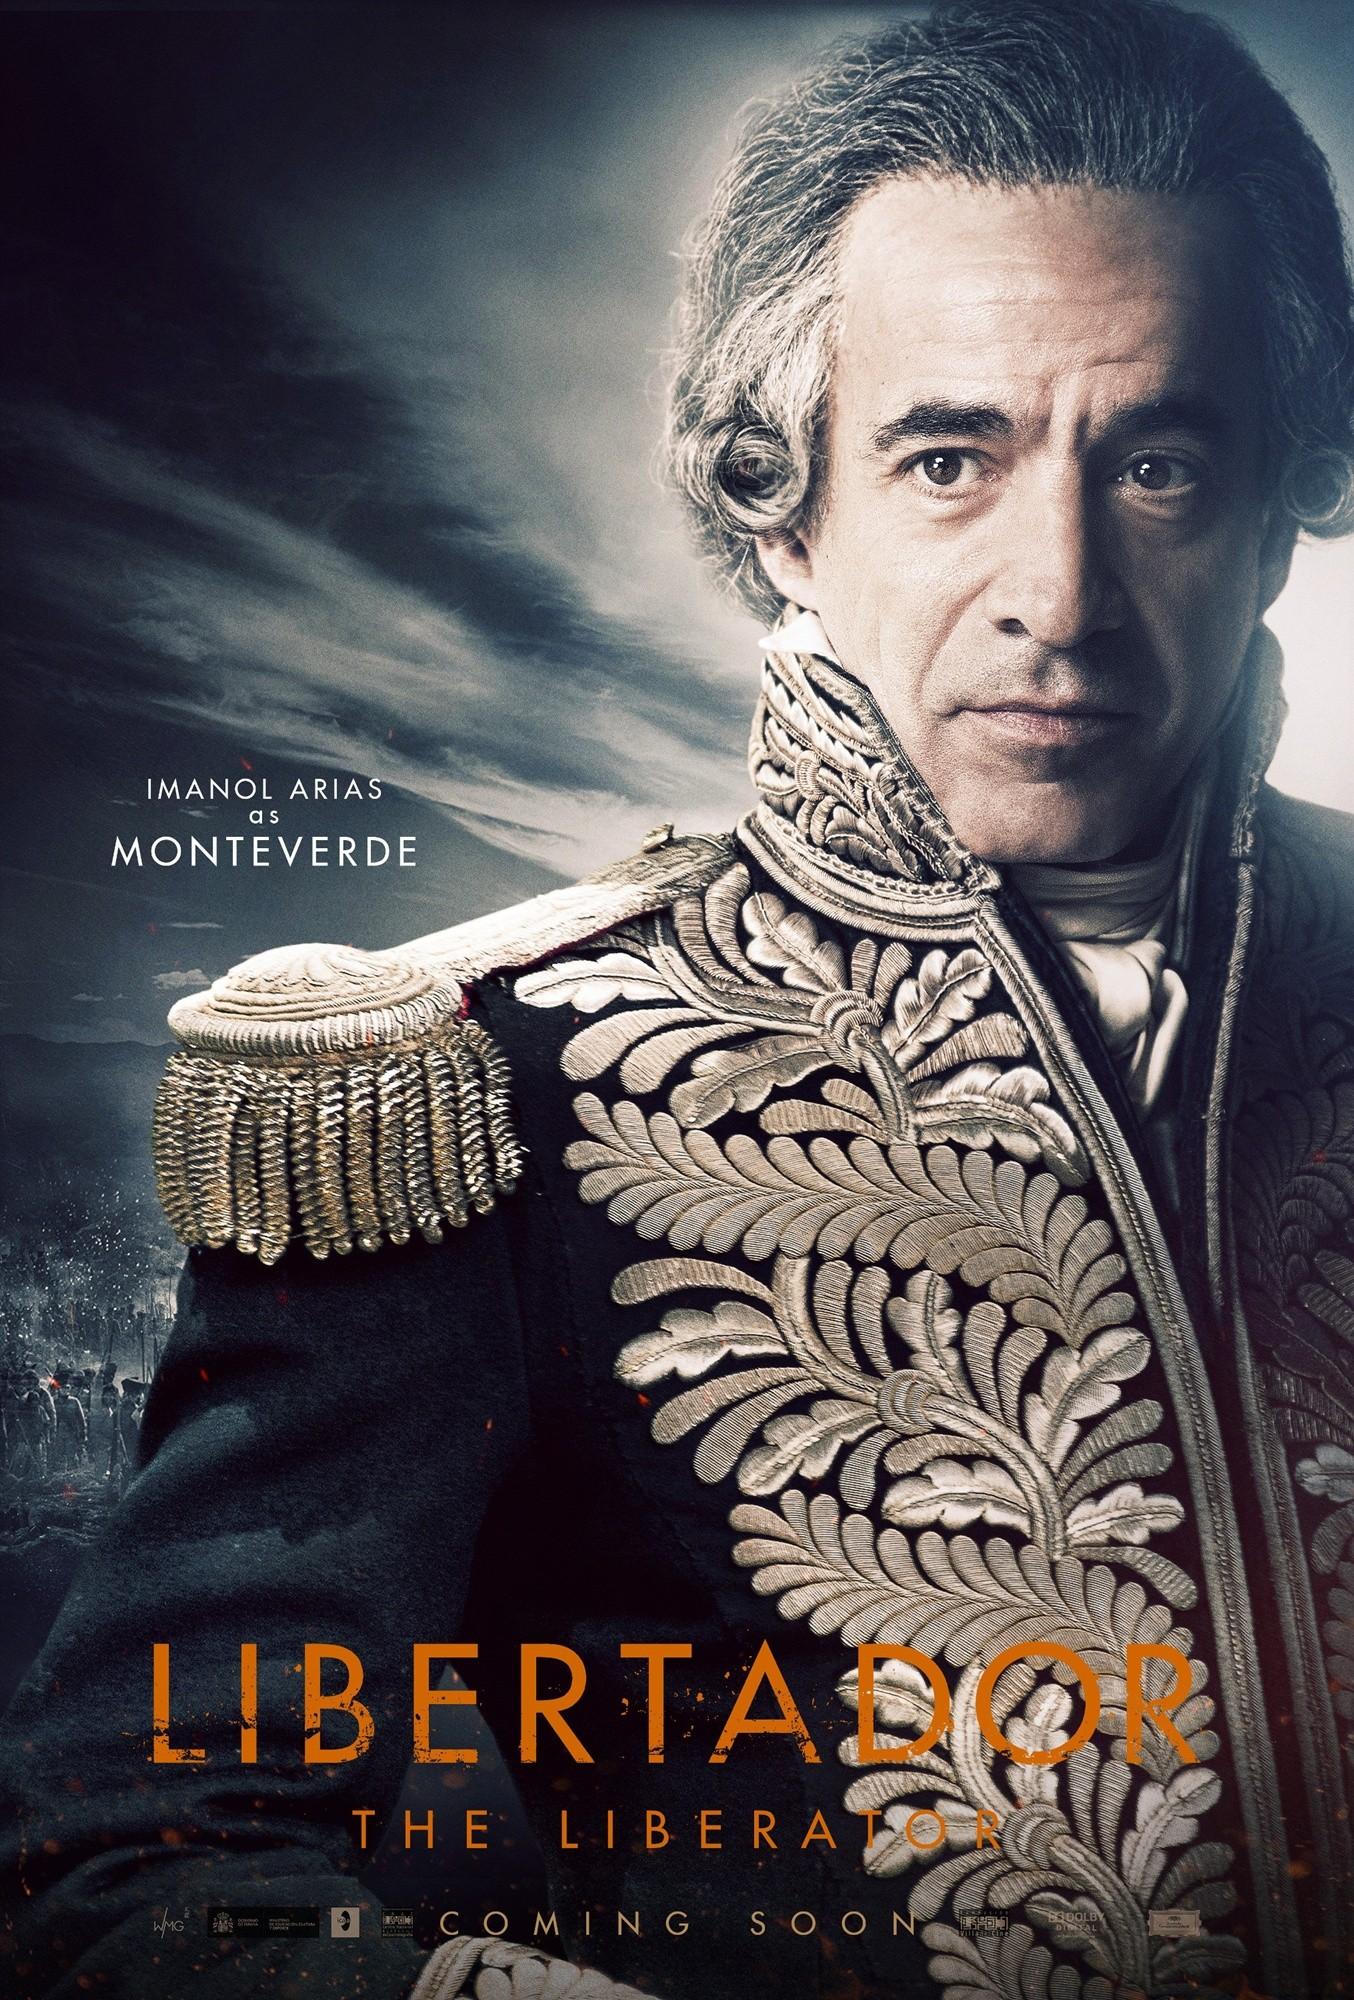 The Liberator (2014) Pictures, Trailer, Reviews, News, DVD and Soundtrack1354 x 2000